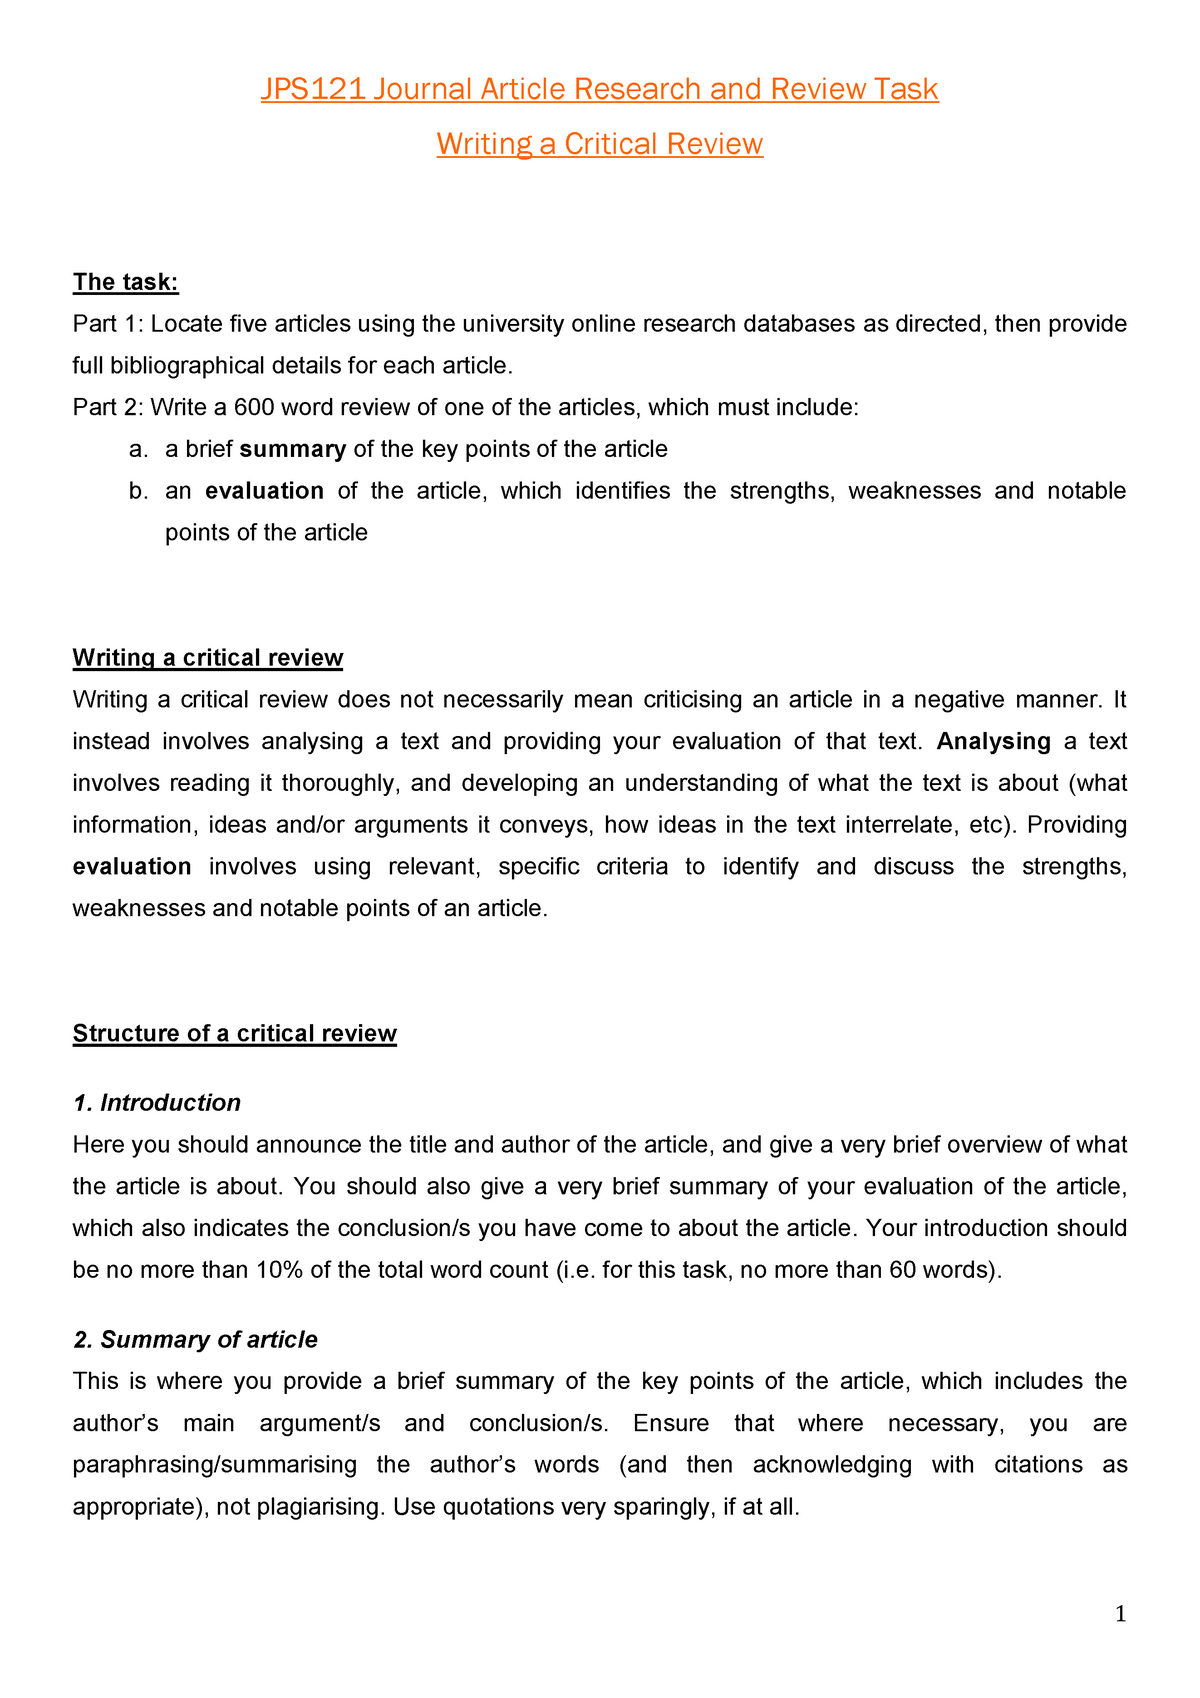 example of a critical evaluation of a research article